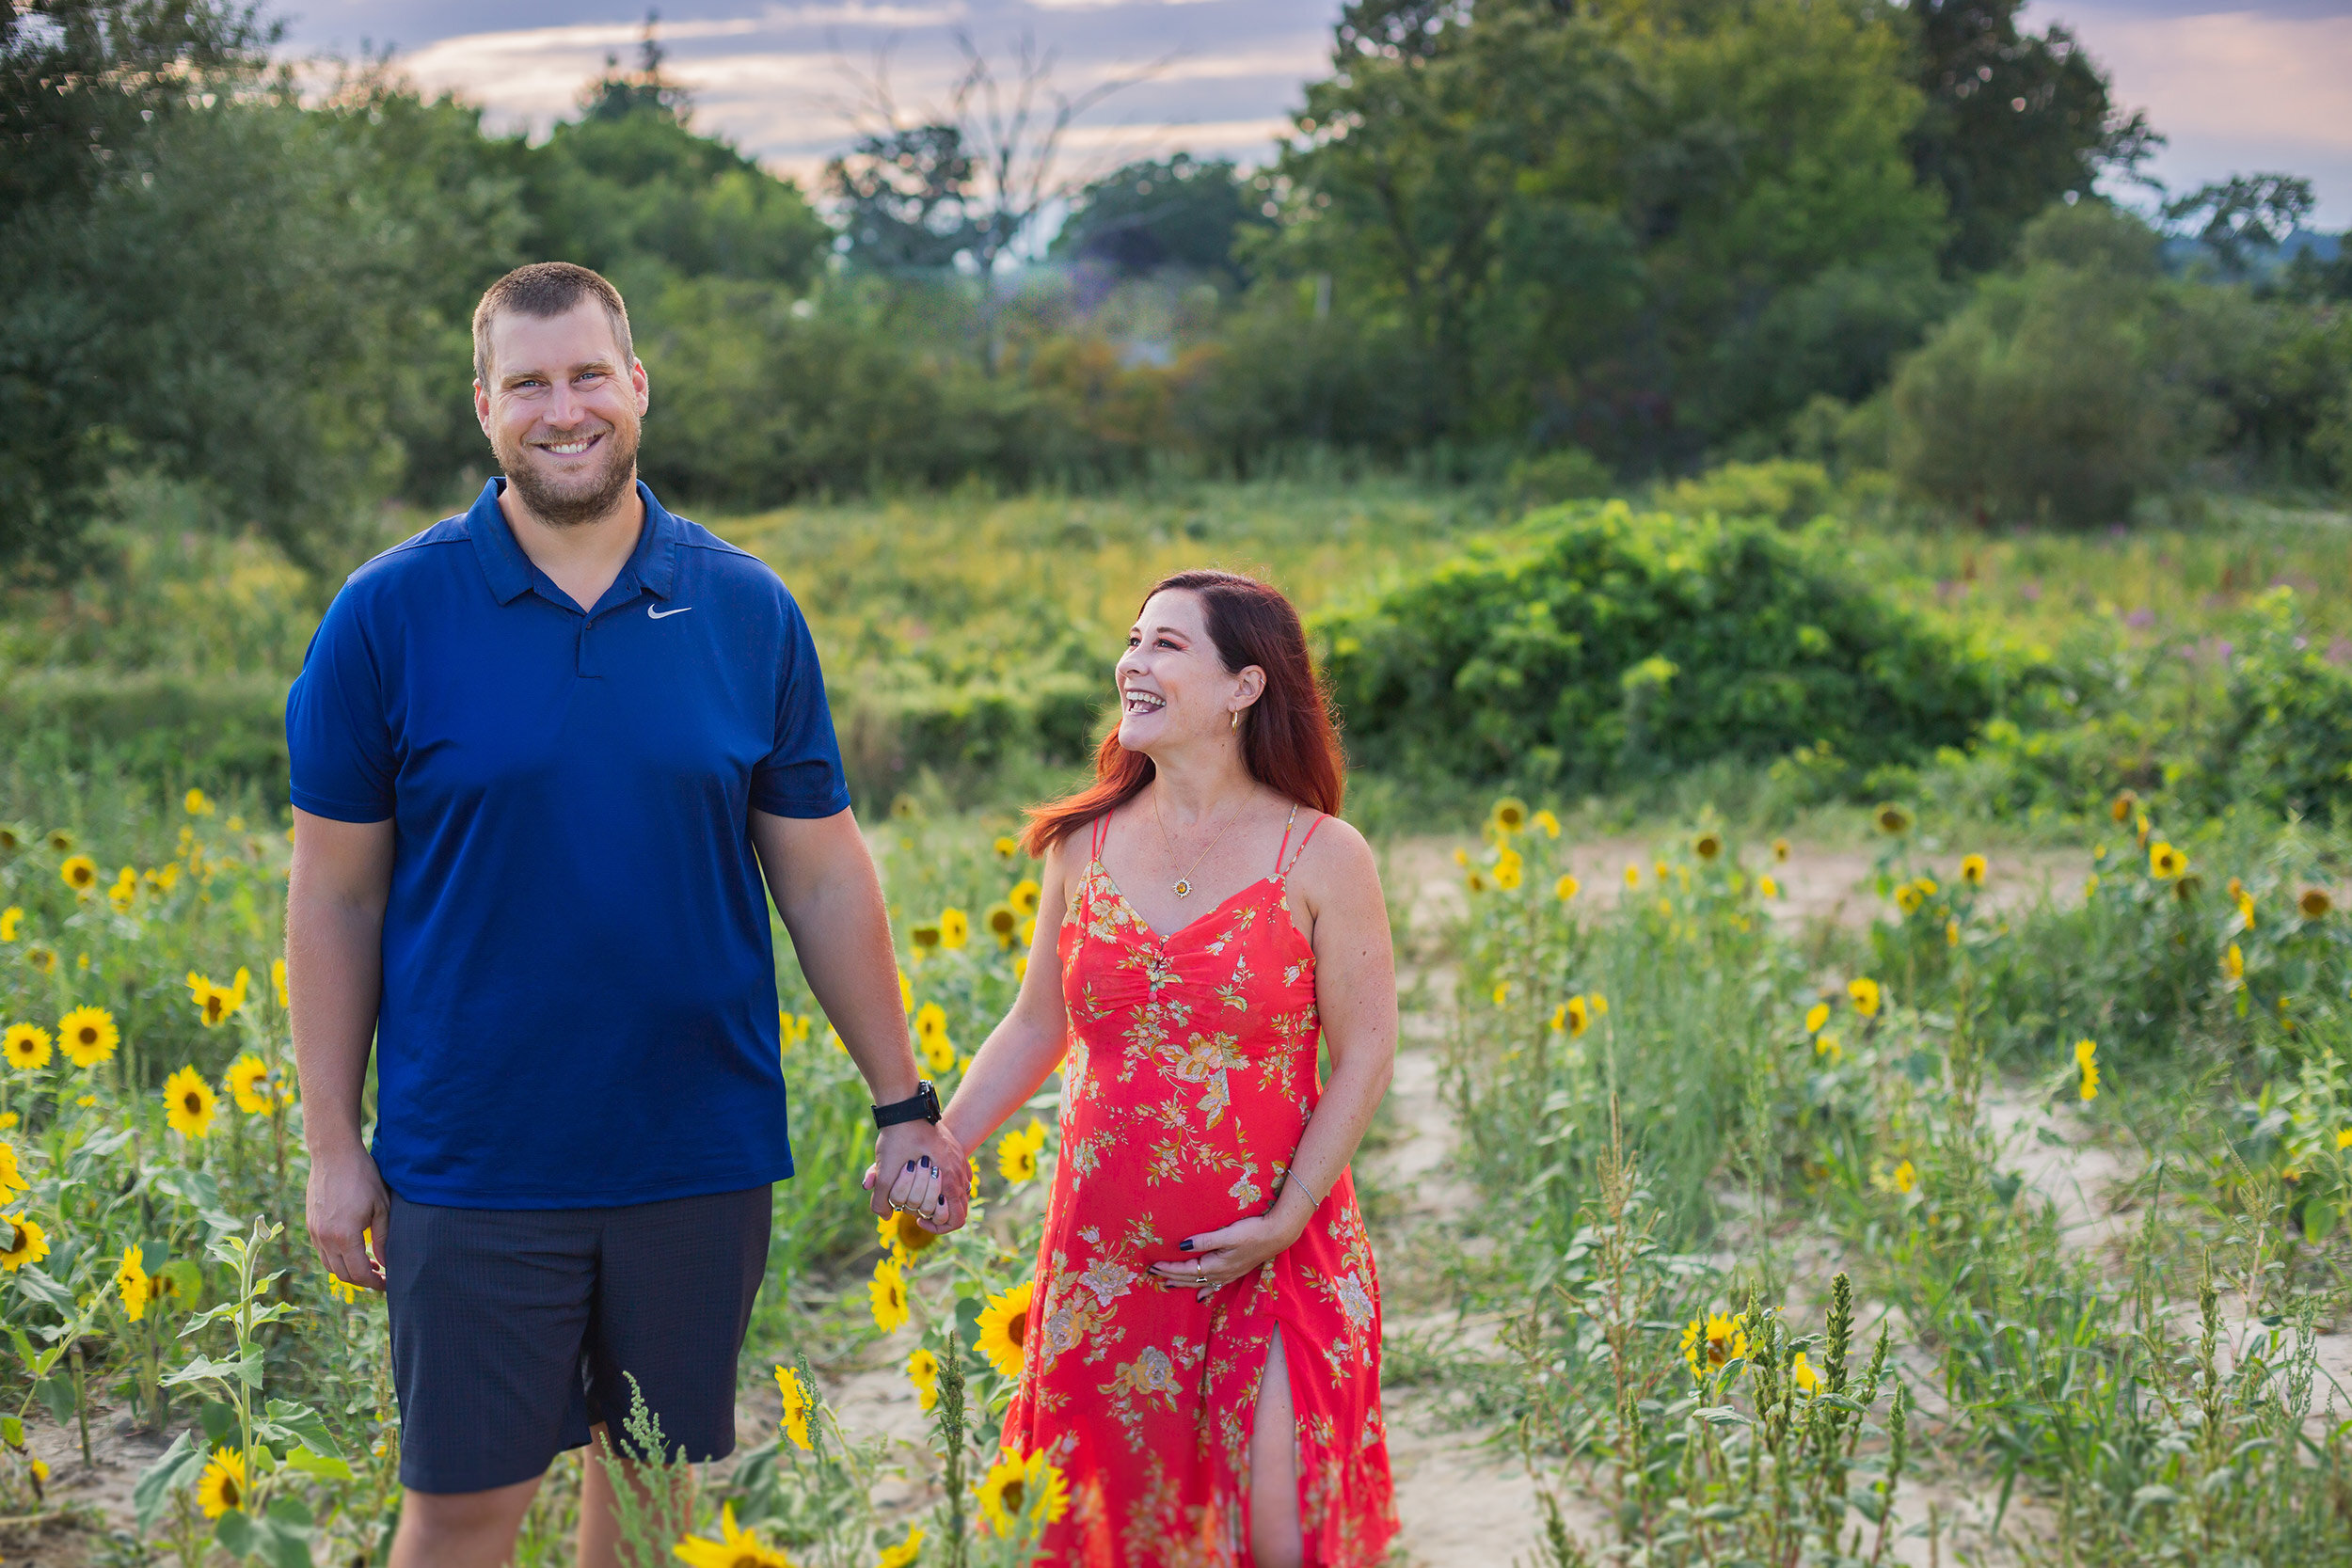 Colby Farm Sunflower Mini-Session | Stephen Grant Photography